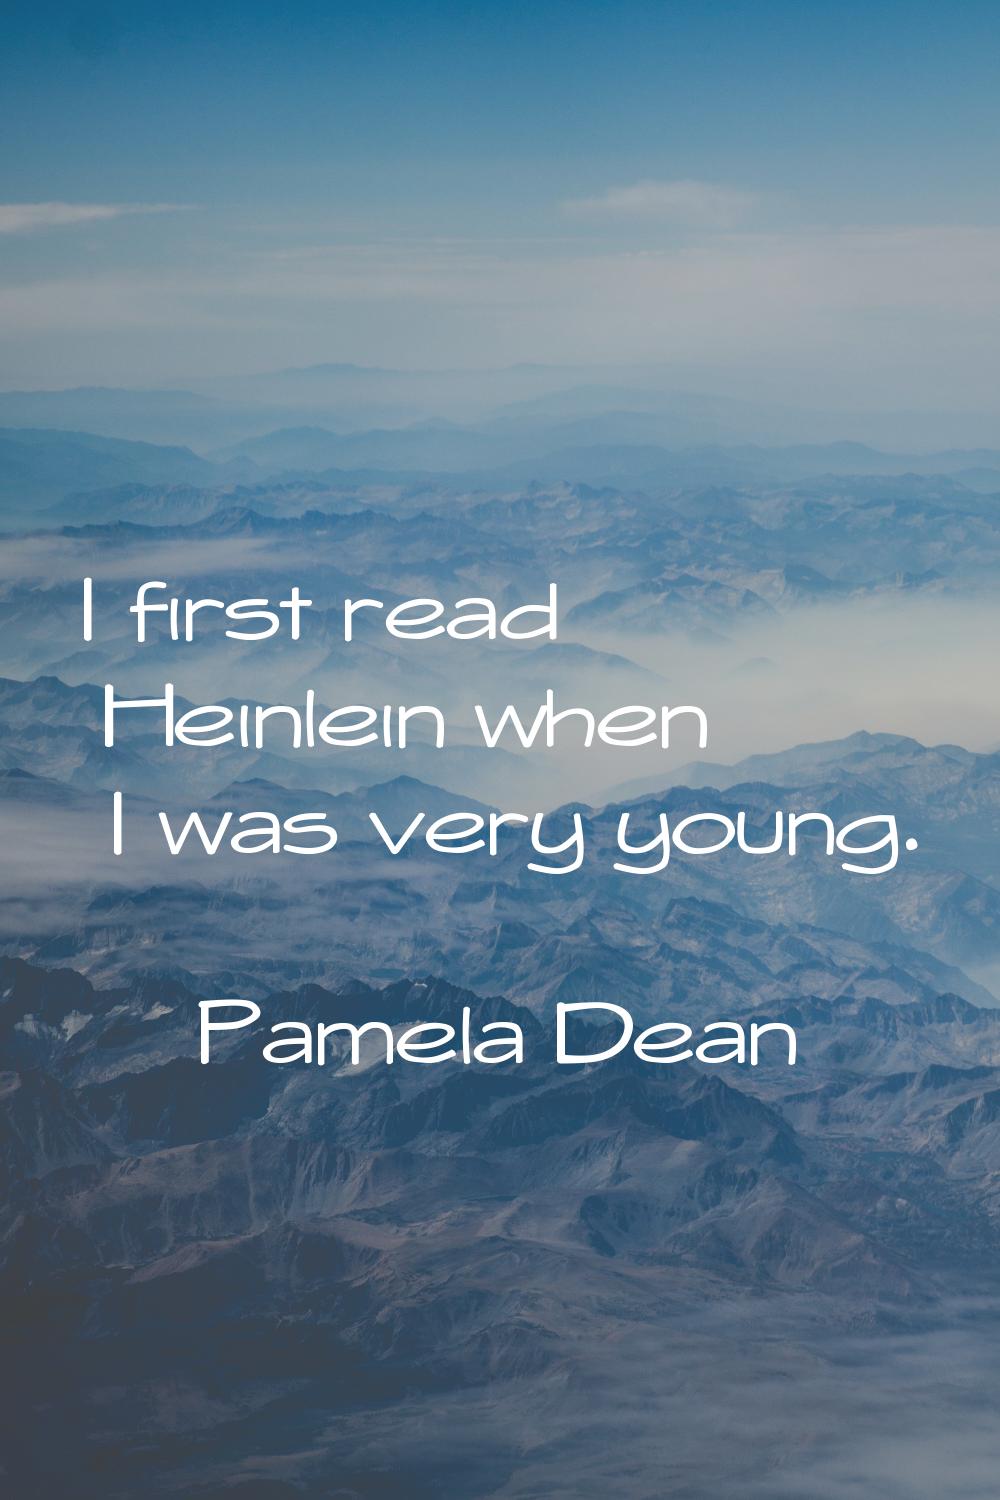 I first read Heinlein when I was very young.